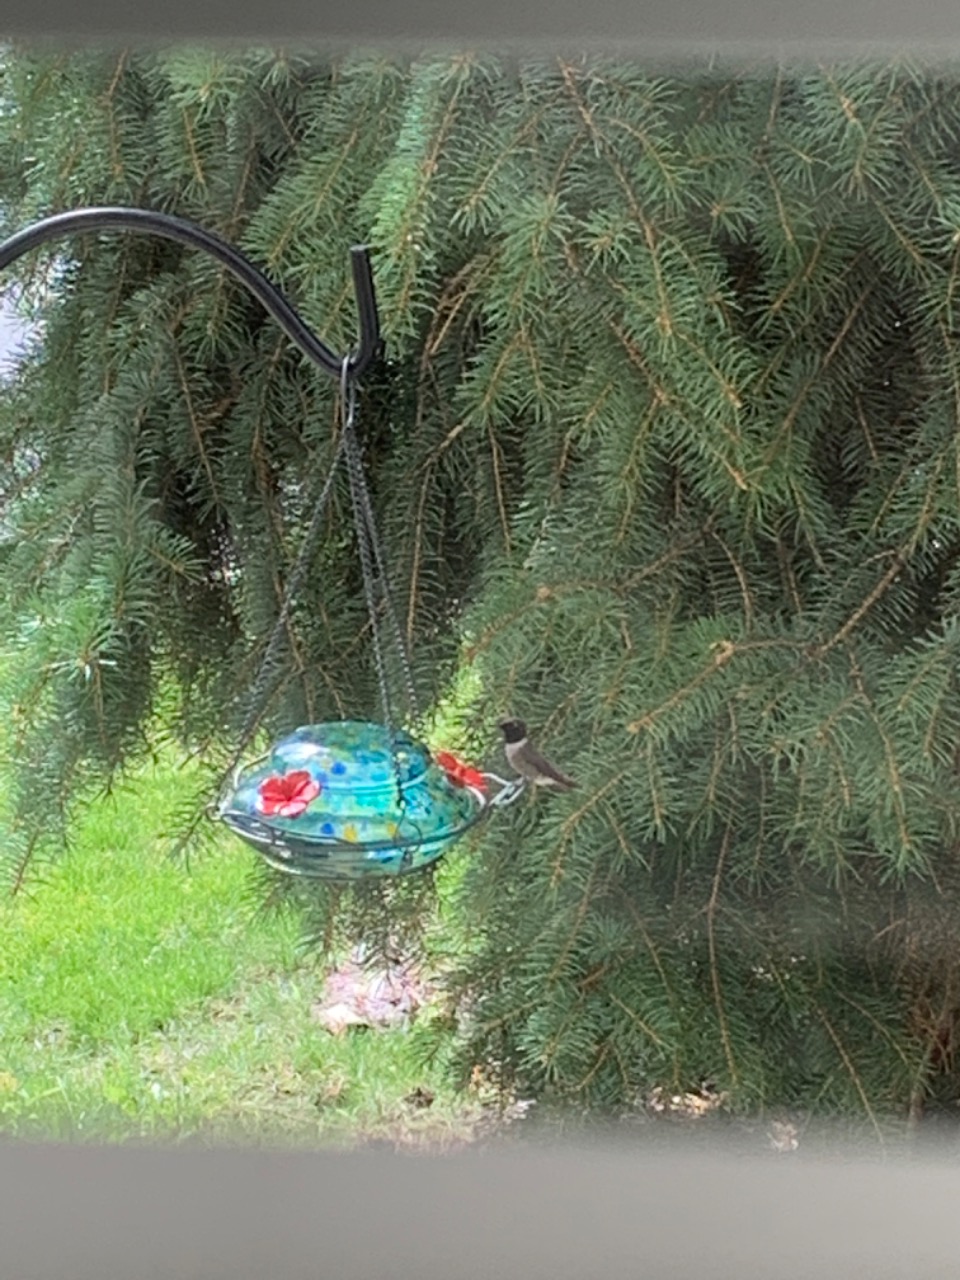 Adult male Black-chinned at feeder